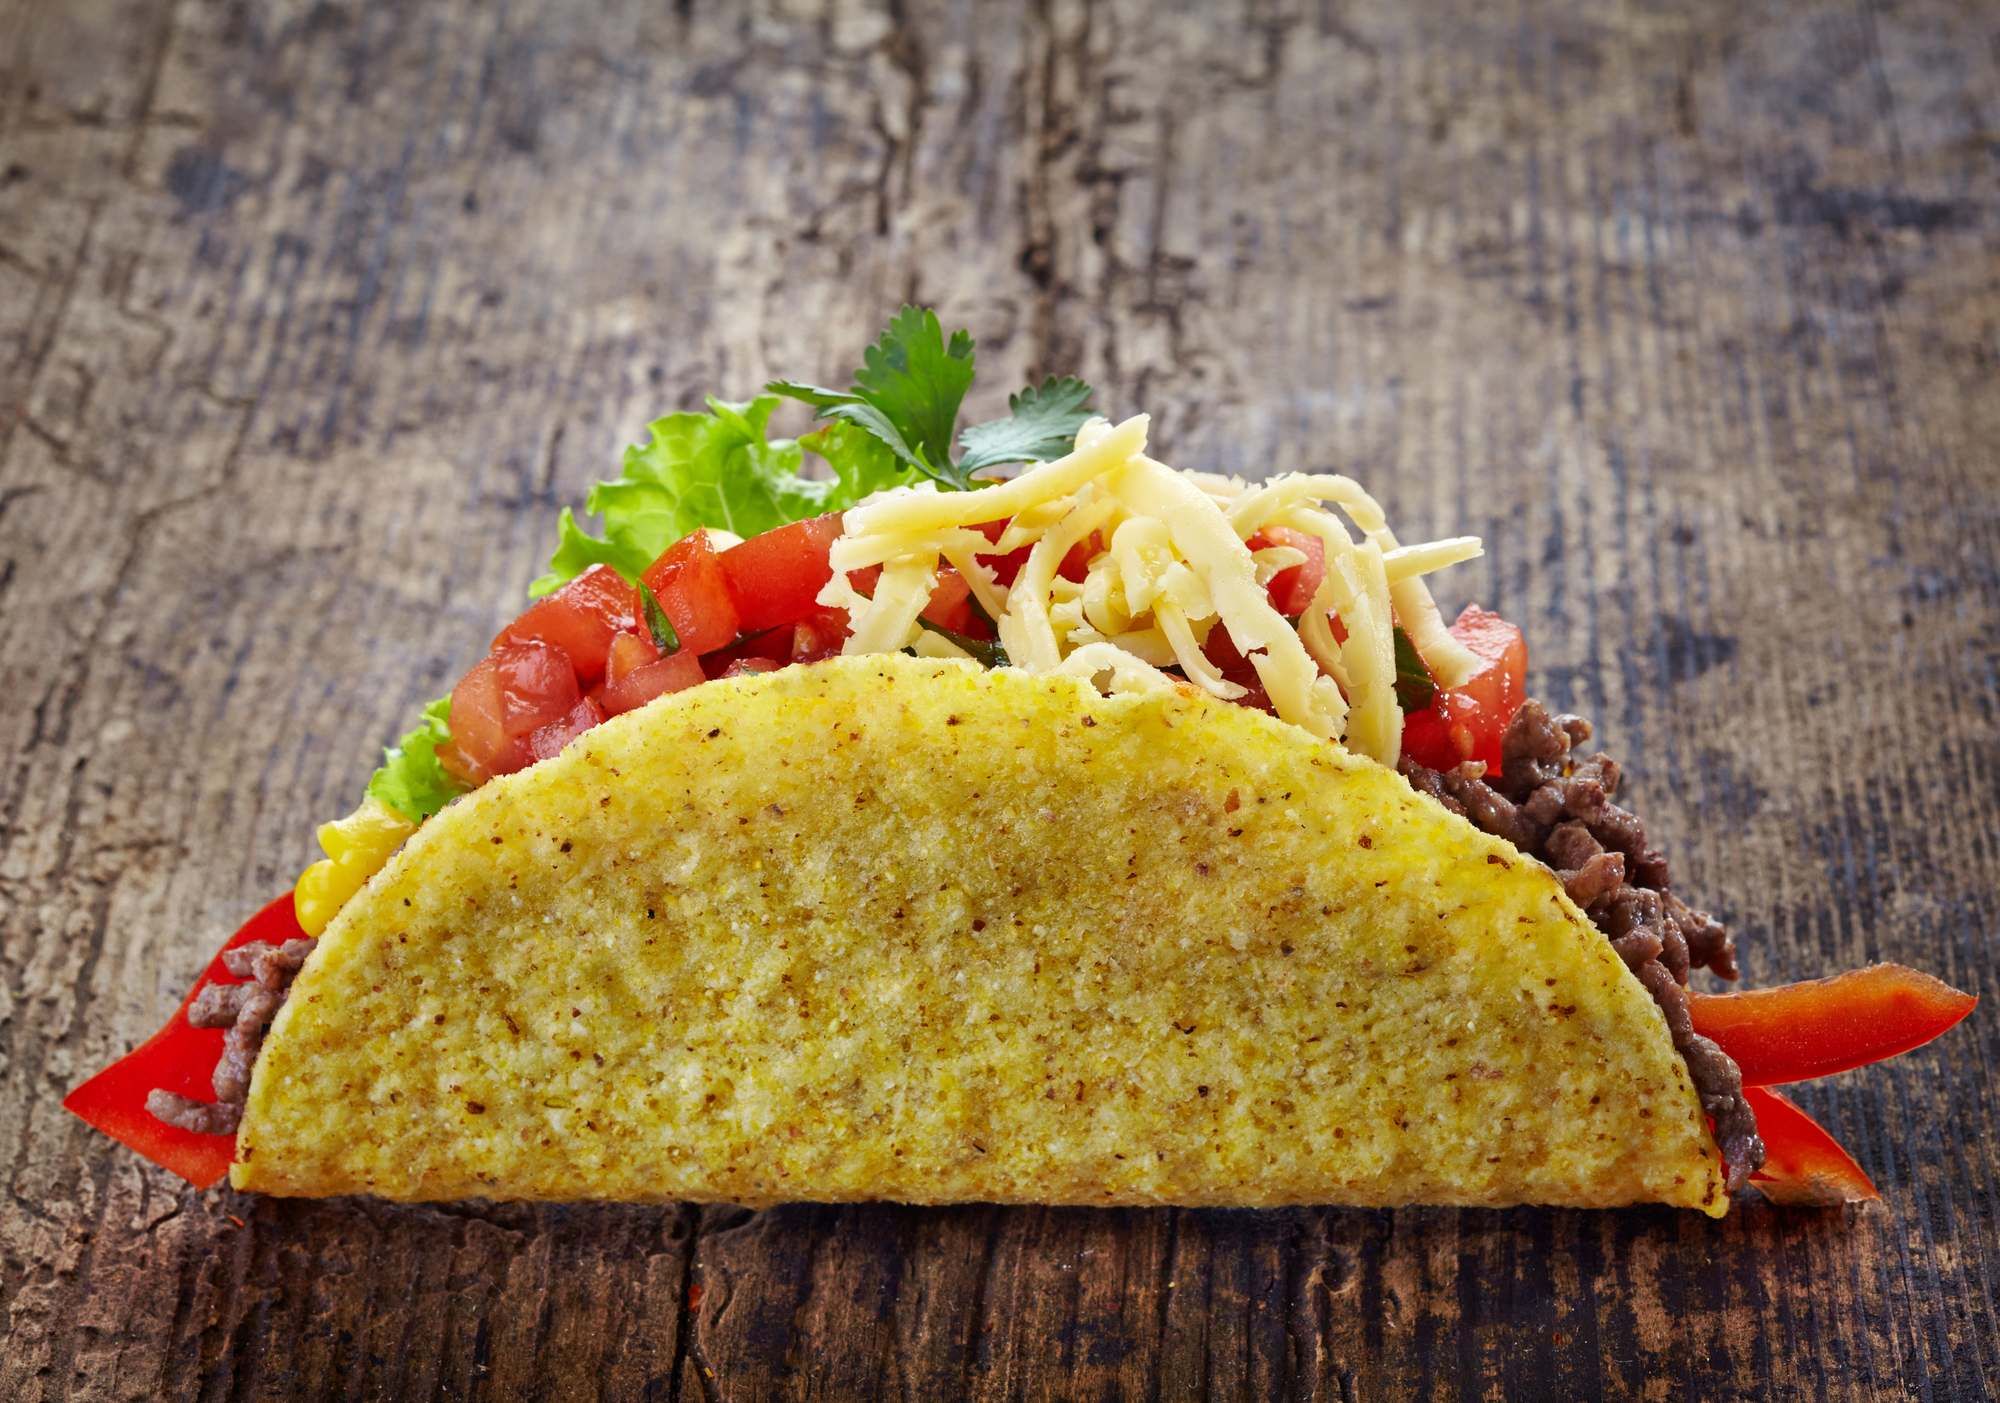 Taco and other products subject to nationwide recalls